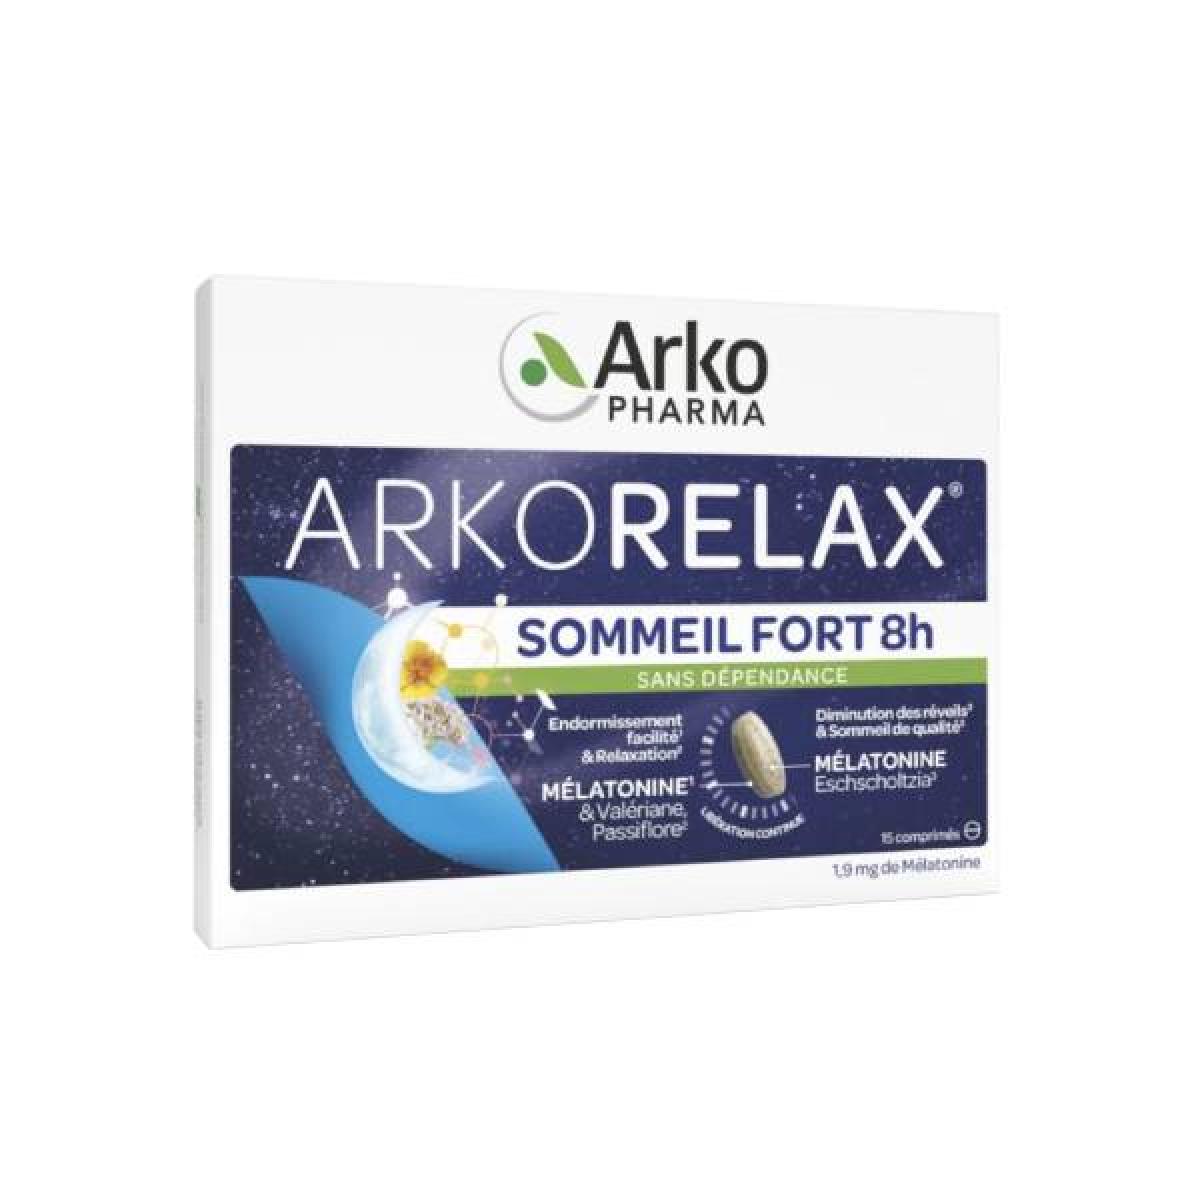 arkopharma arkorelax sommeil fort 8h 30 comprimes offre speciale parapharmacie pharmarket